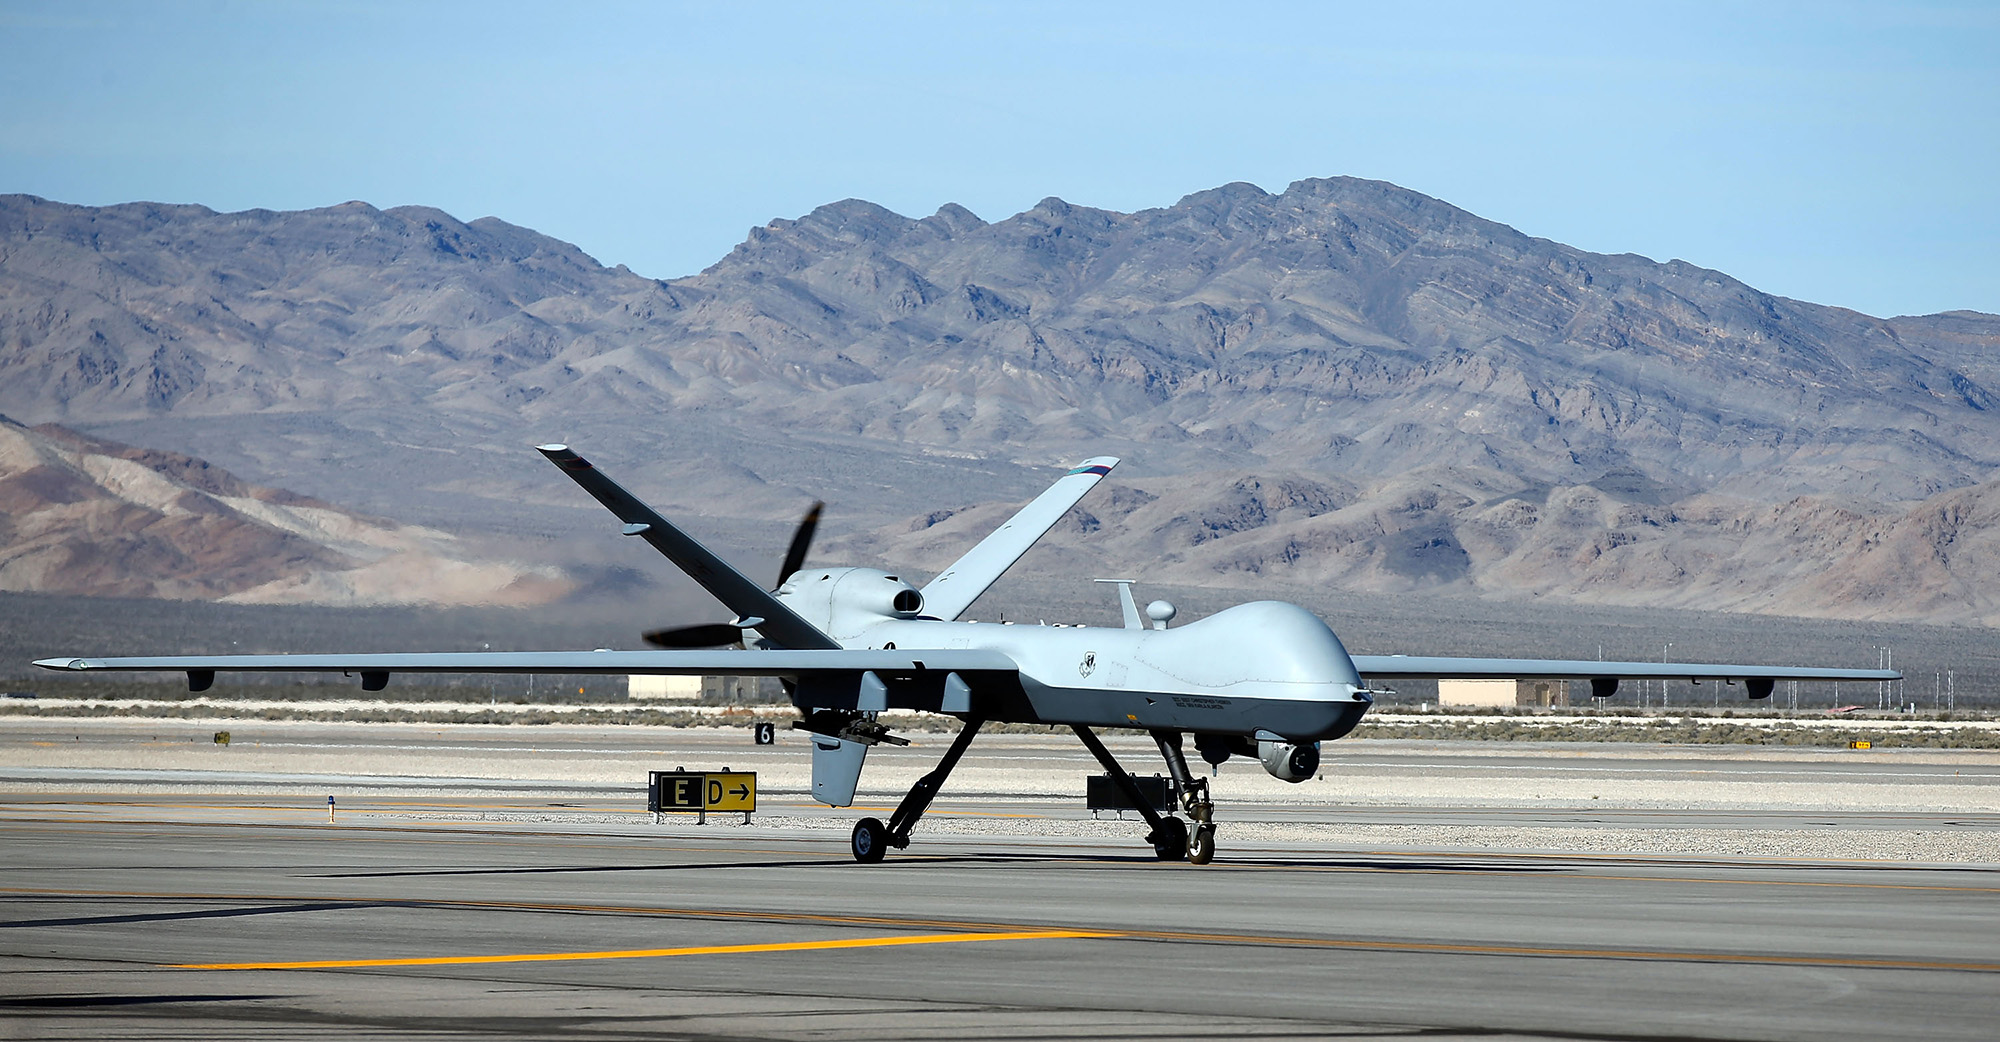 An MQ-9 Reaper remotely piloted aircraft (RPA) taxis during a training mission at Creech Air Force Base on November 17, 2015, in Indian Springs, Nevada. 